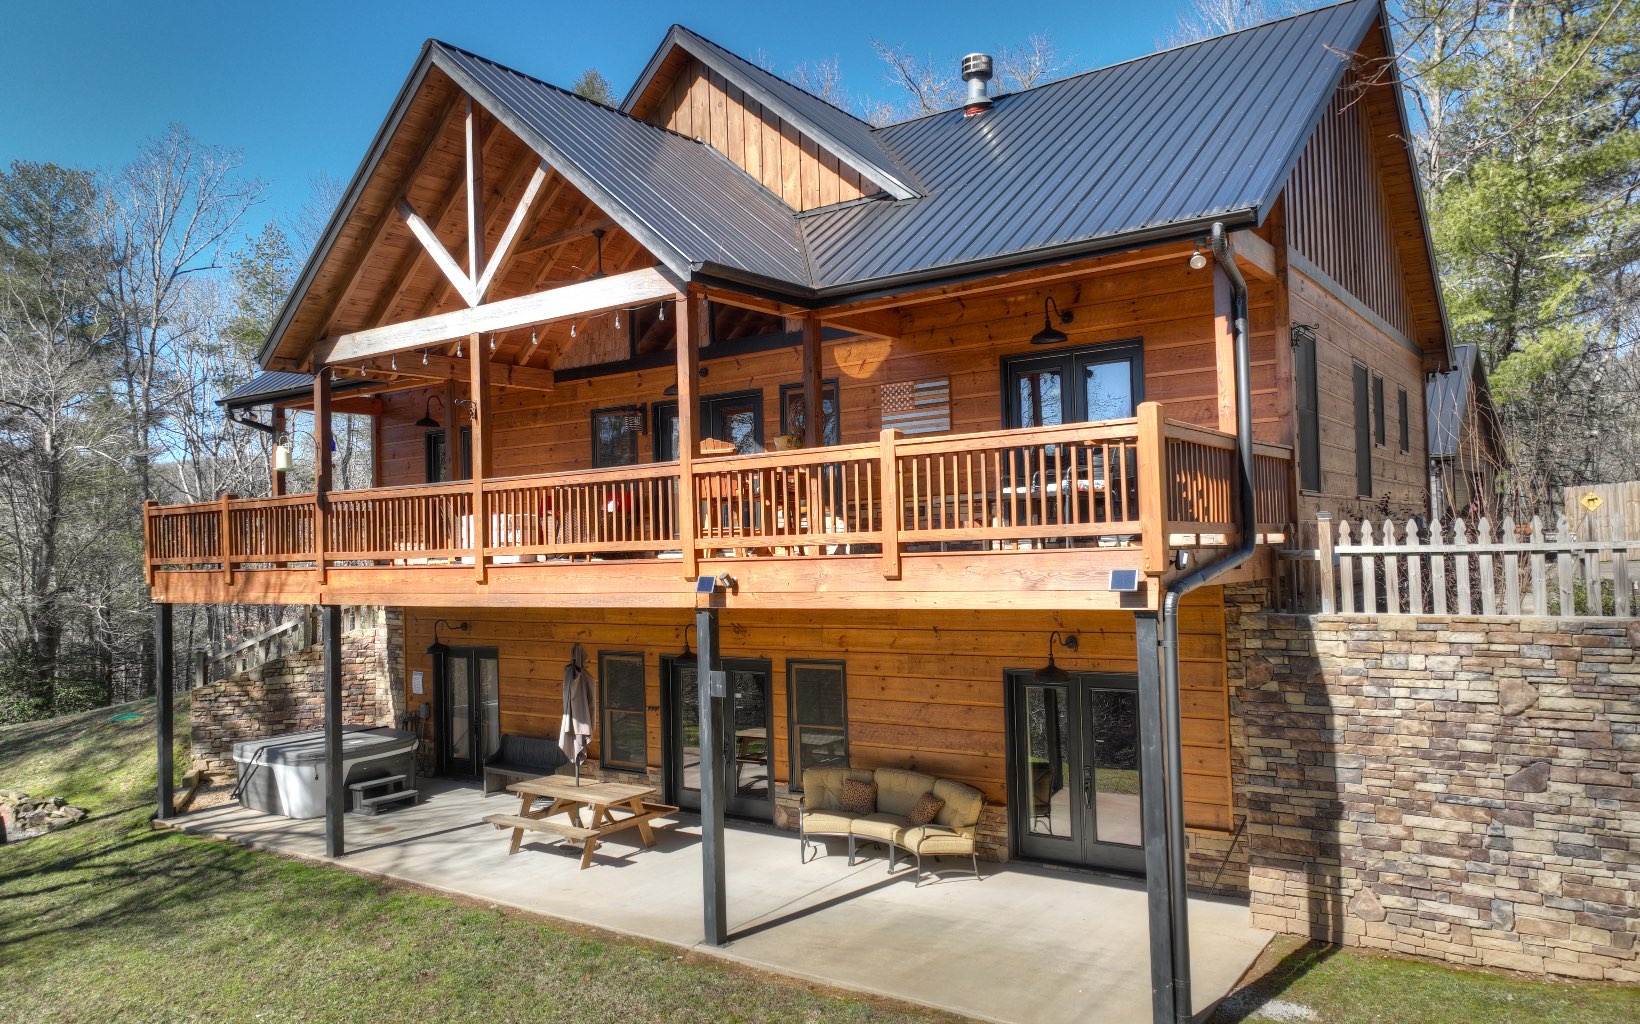 Walk in & you'll immediately fall in love with the charm & details this cabin possesses. Under 5 mi from Downtown Blue Ridge - already on a successful rental program, this one will not disappoint! Upgraded finishes, unique lighting, cathedral ceilings & amazing rustic touches all combine to keep you in awe as you walk through. Chink log interior w stone fireplace, smooth finish cabinetry paired w granite countertops & eat-in kitchen. Open great room w cathedral ceilings, distinguished hardwood floors, spilt bedroom floor plan allows both bedrooms to be Masters! Separate kitchen in terrace level open to the bonus/rec room! Tin & Wood Beam coffered ceilings & beautiful stone fireplace. Oversized deck on main level & walk out patio on terrace level. Tons of room for pets & children! Actual walking trail to small fishing lake on the property! Additional building sites available as well! 1 car garage and full home generator!